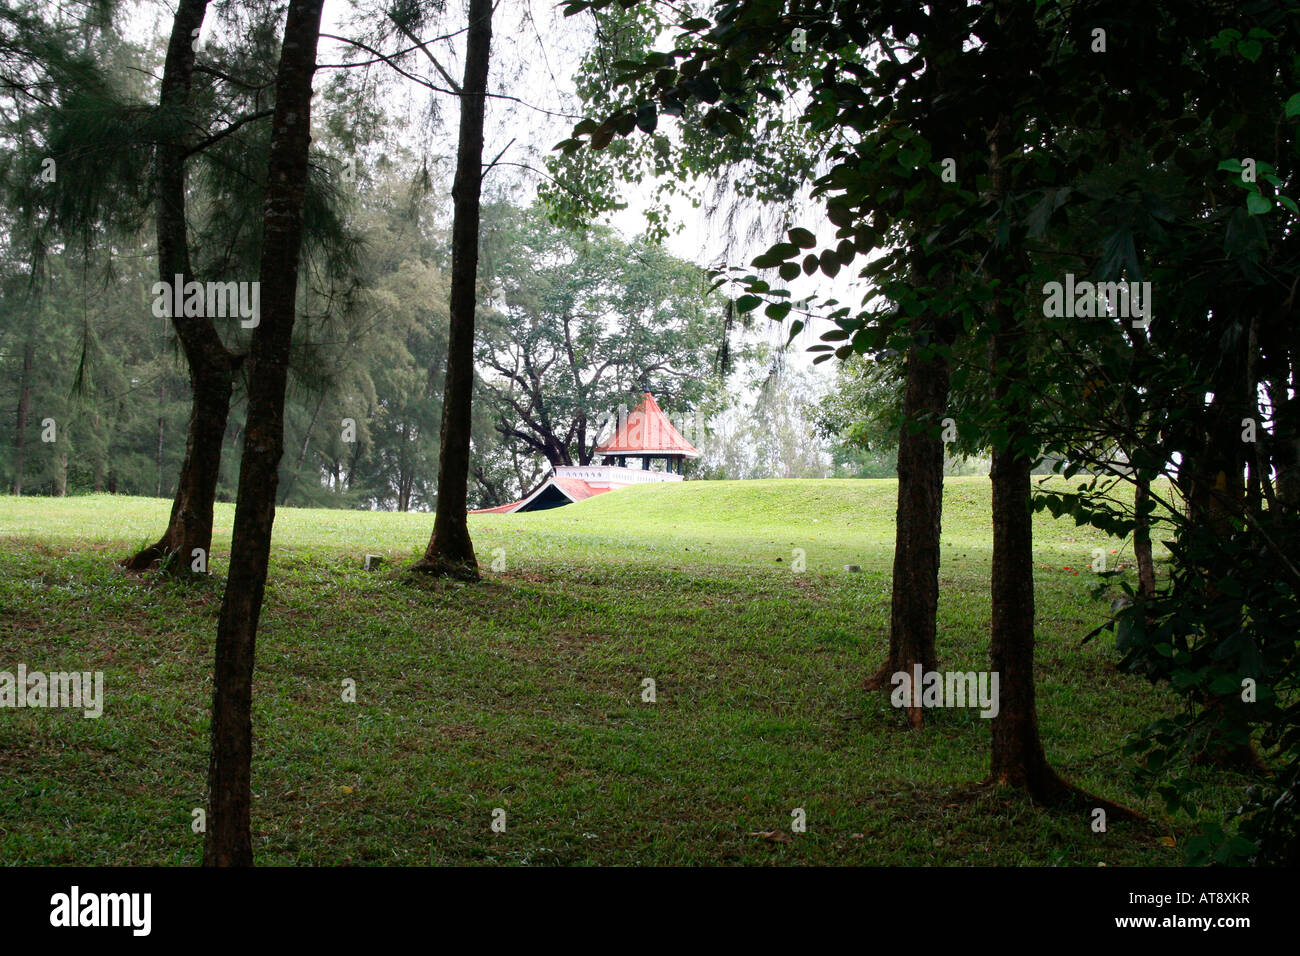 Landscaped charm of a golf-course and clubhouse viewed through a strand of trees Stock Photo